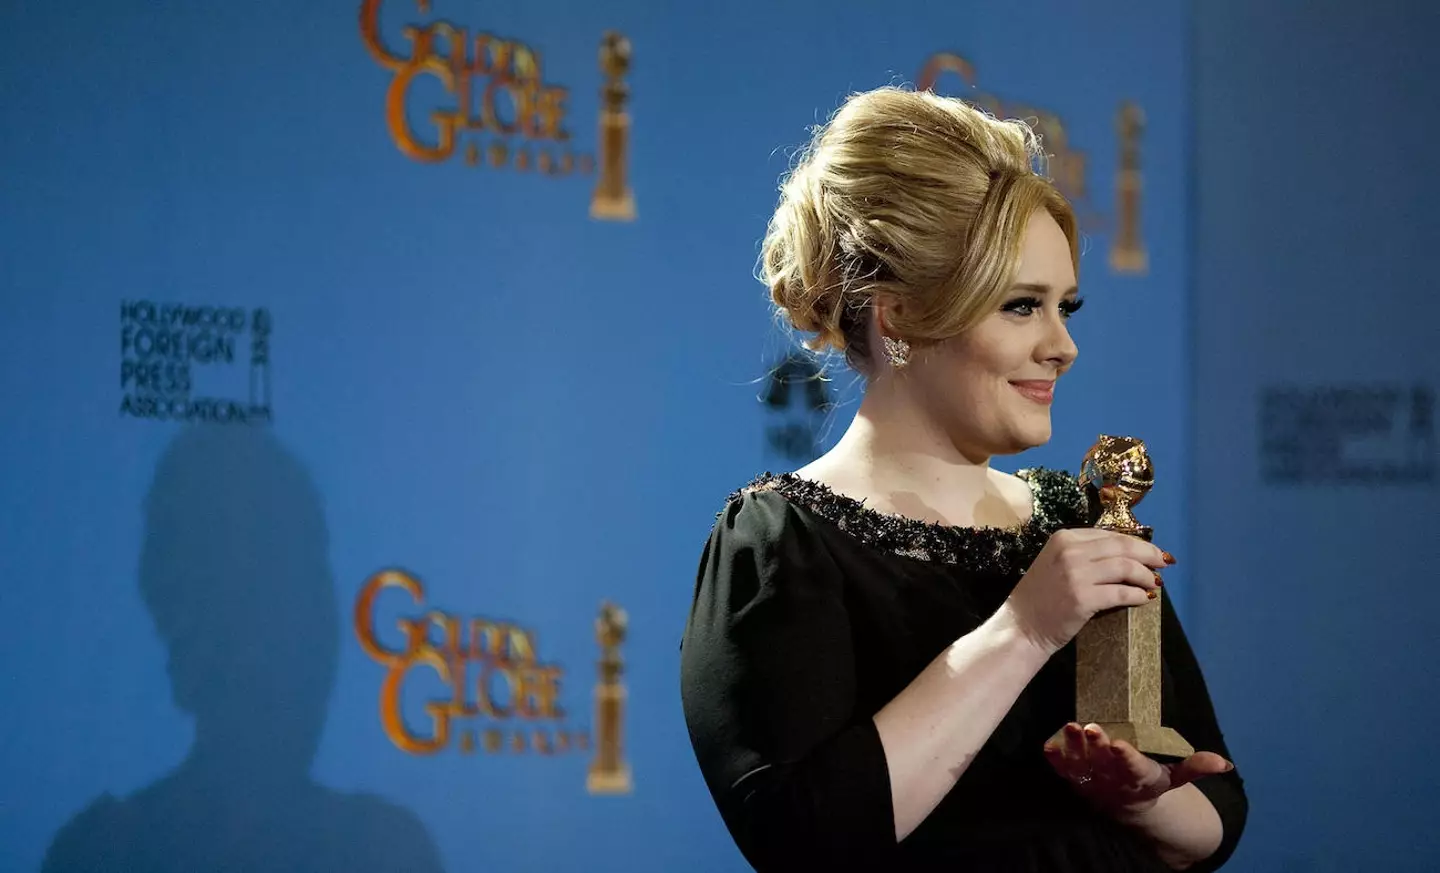 Adele landed an Oscar for 'Best Original Song for a Motion Picture' for 2012's Skyfall.